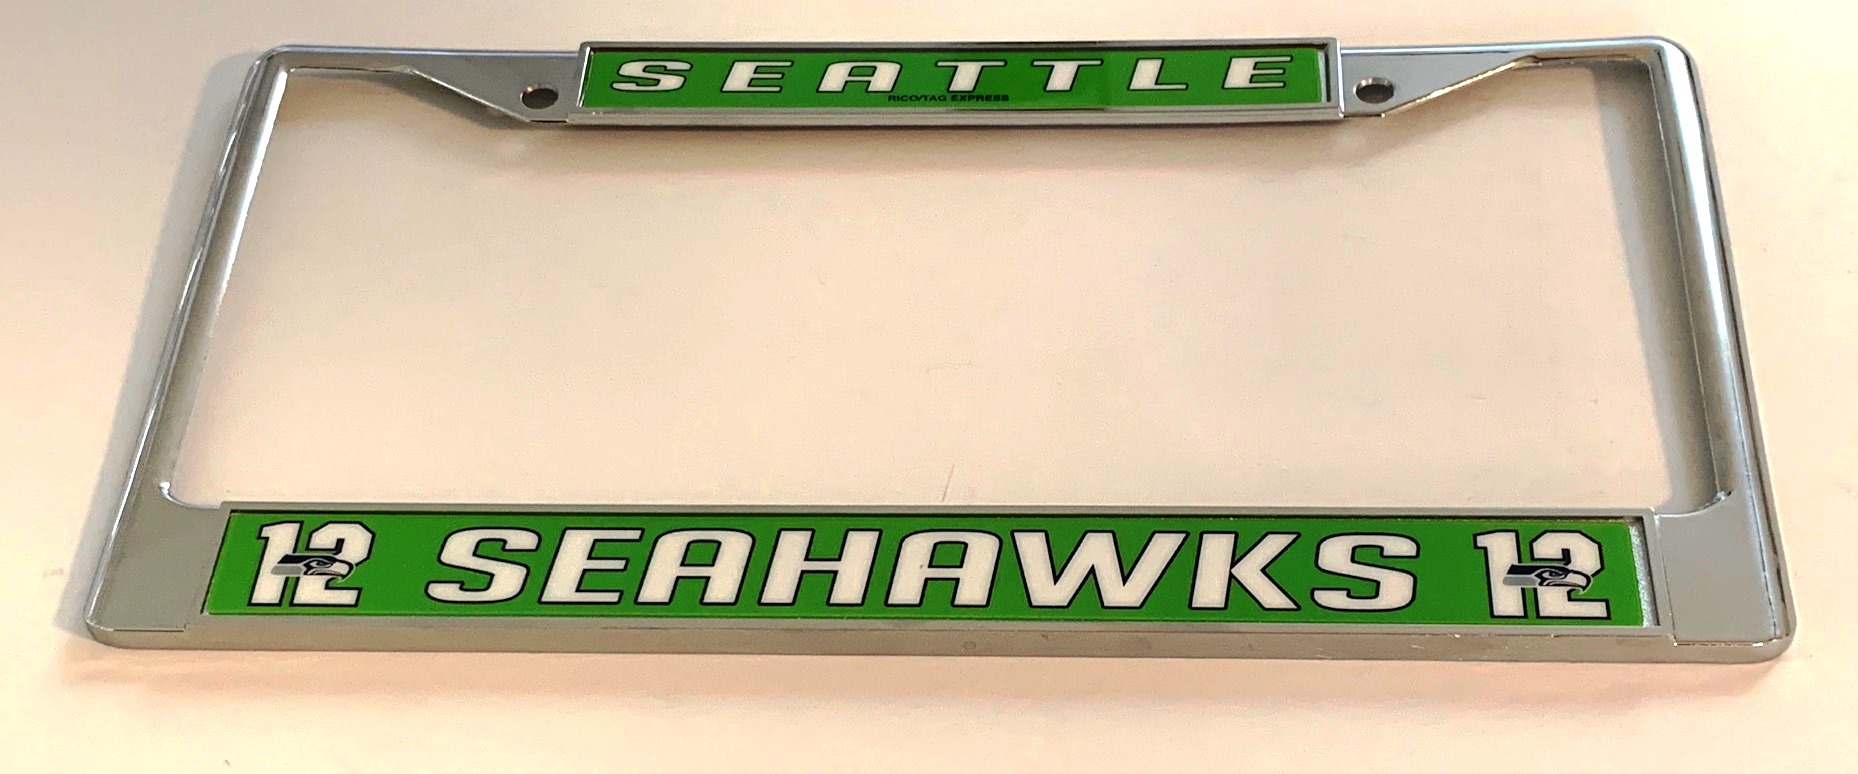 Seattle Seahawks JERSEY #12 Chrome License Plate Frame